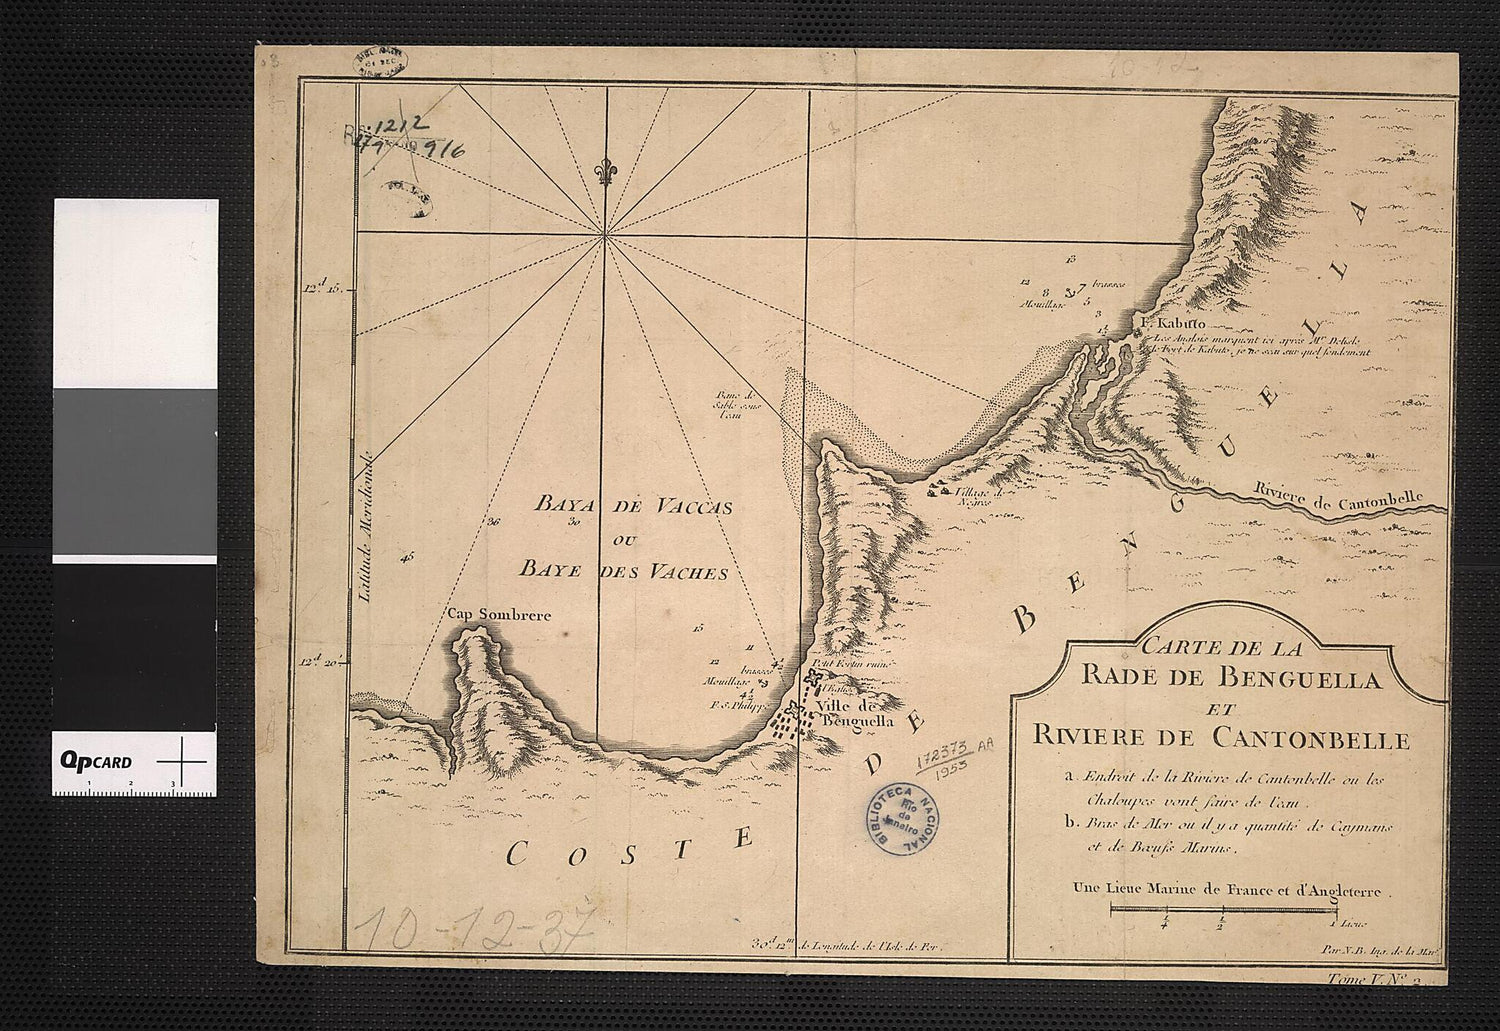 This old map of Map of the Bay of Benguela and the Cantonbelle River. (Carte De La Rade De Benguela Et Riviere De Cantonbelle) from 1700 was created by  Nicolas in 1700